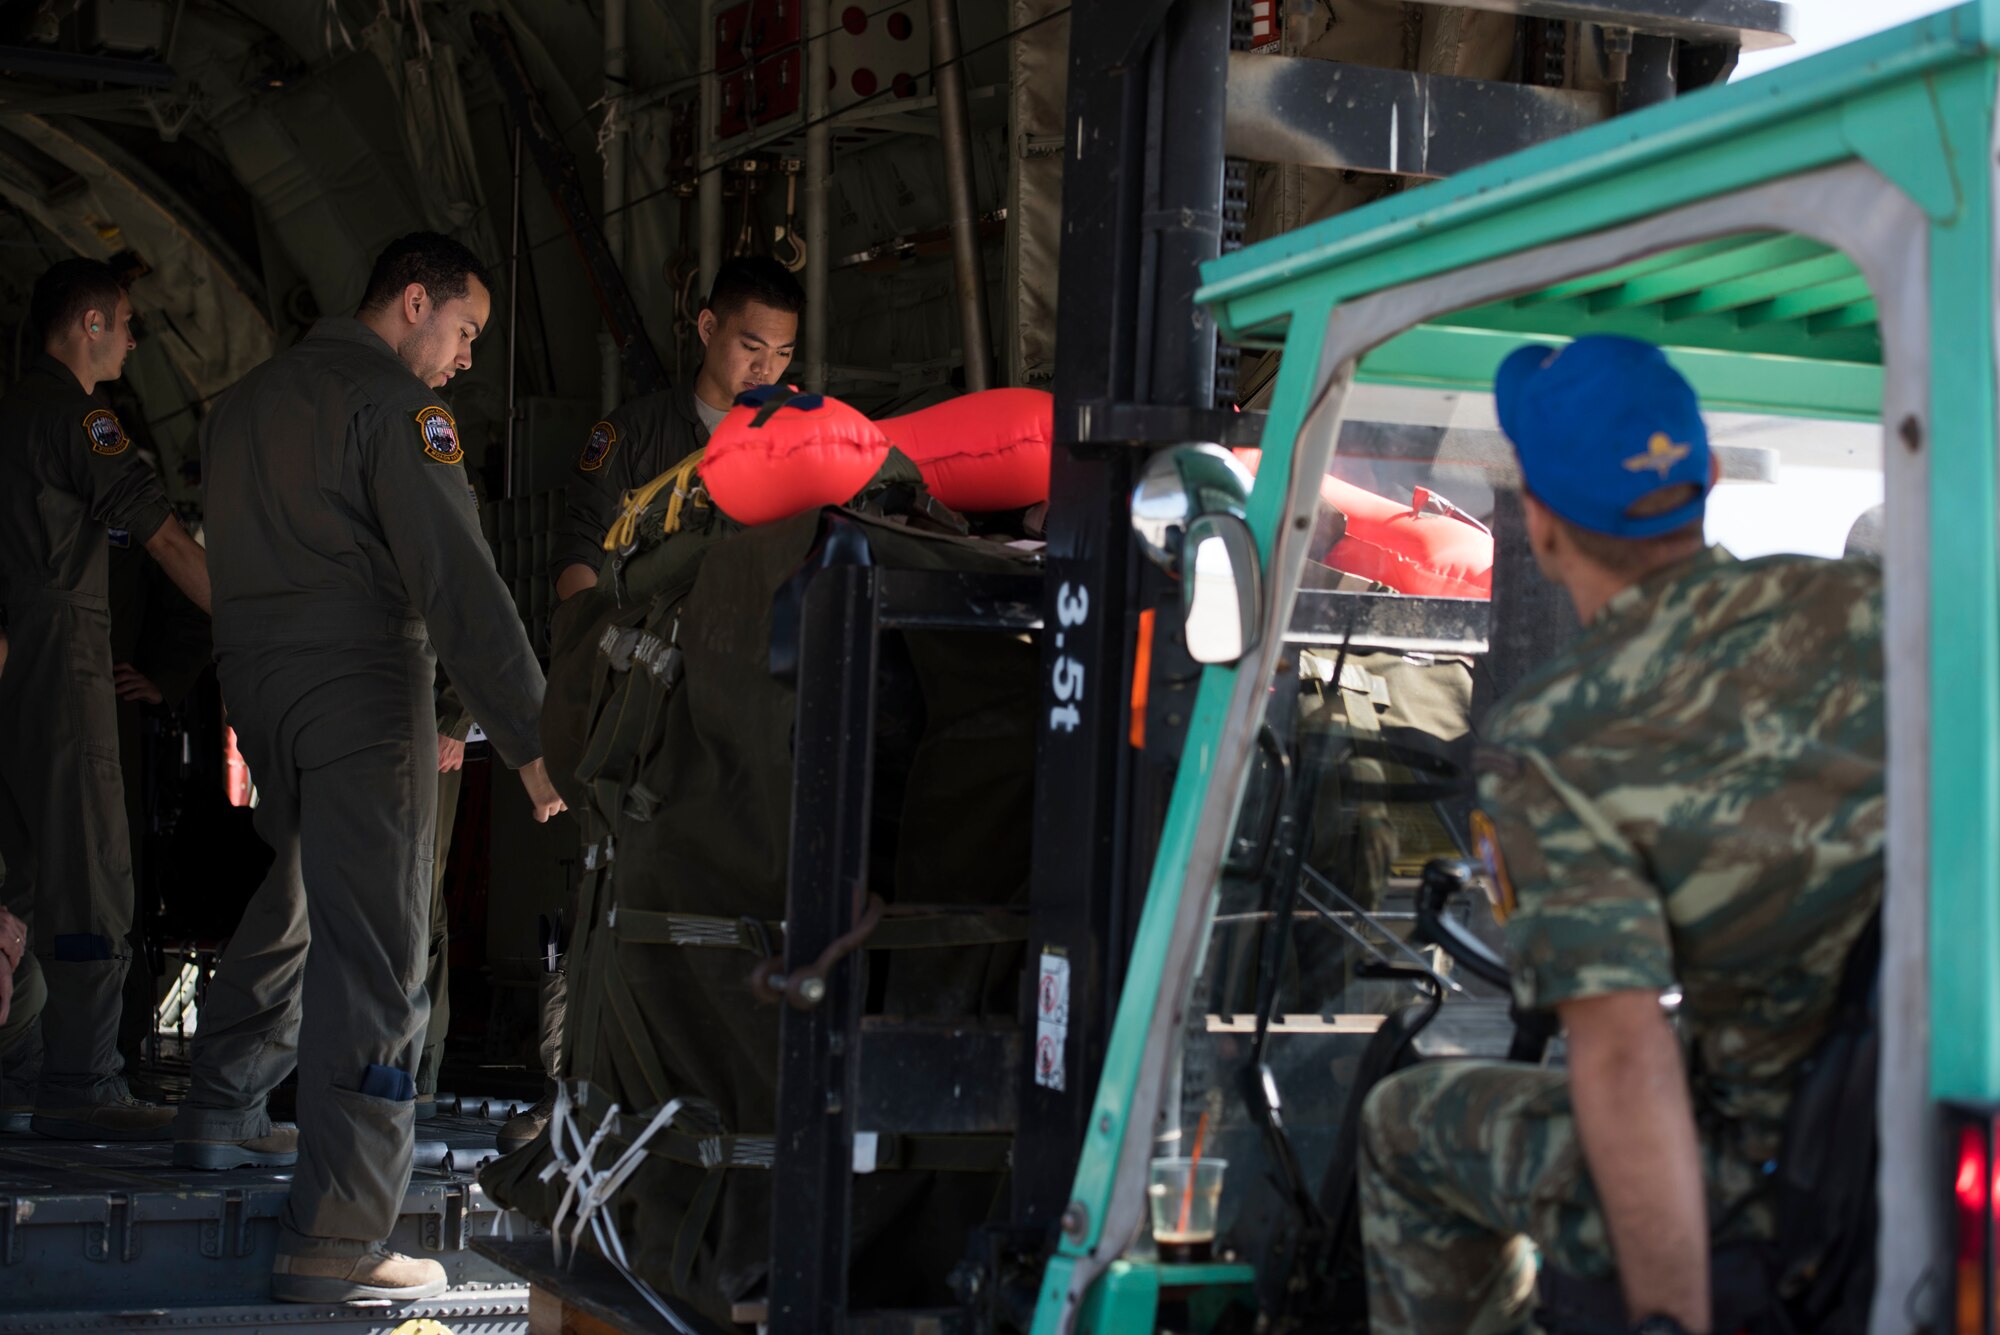 U.S. Air Force Staff Sgt. Jayson Cruz Santiago (left) and Airman 1st Class David Tan, both 37th Airlift Squadron C-130J Super Hercules loadmasters, inspect a rigging alternate method zodiac bundle as a Hellenic air force Airman drives a forklift during exercise Stolen Cerberus V, on Elefsis Air Base, Greece, May 9, 2018. Loadmasters are required to verify cargo is packed properly before allowing the cargo to fly. The United States and Greece, as NATO allies, are continually seeking opportunities to continue developing our strong relationship. (U.S. Air Force photo by Senior Airman Devin M. Rumbaugh)